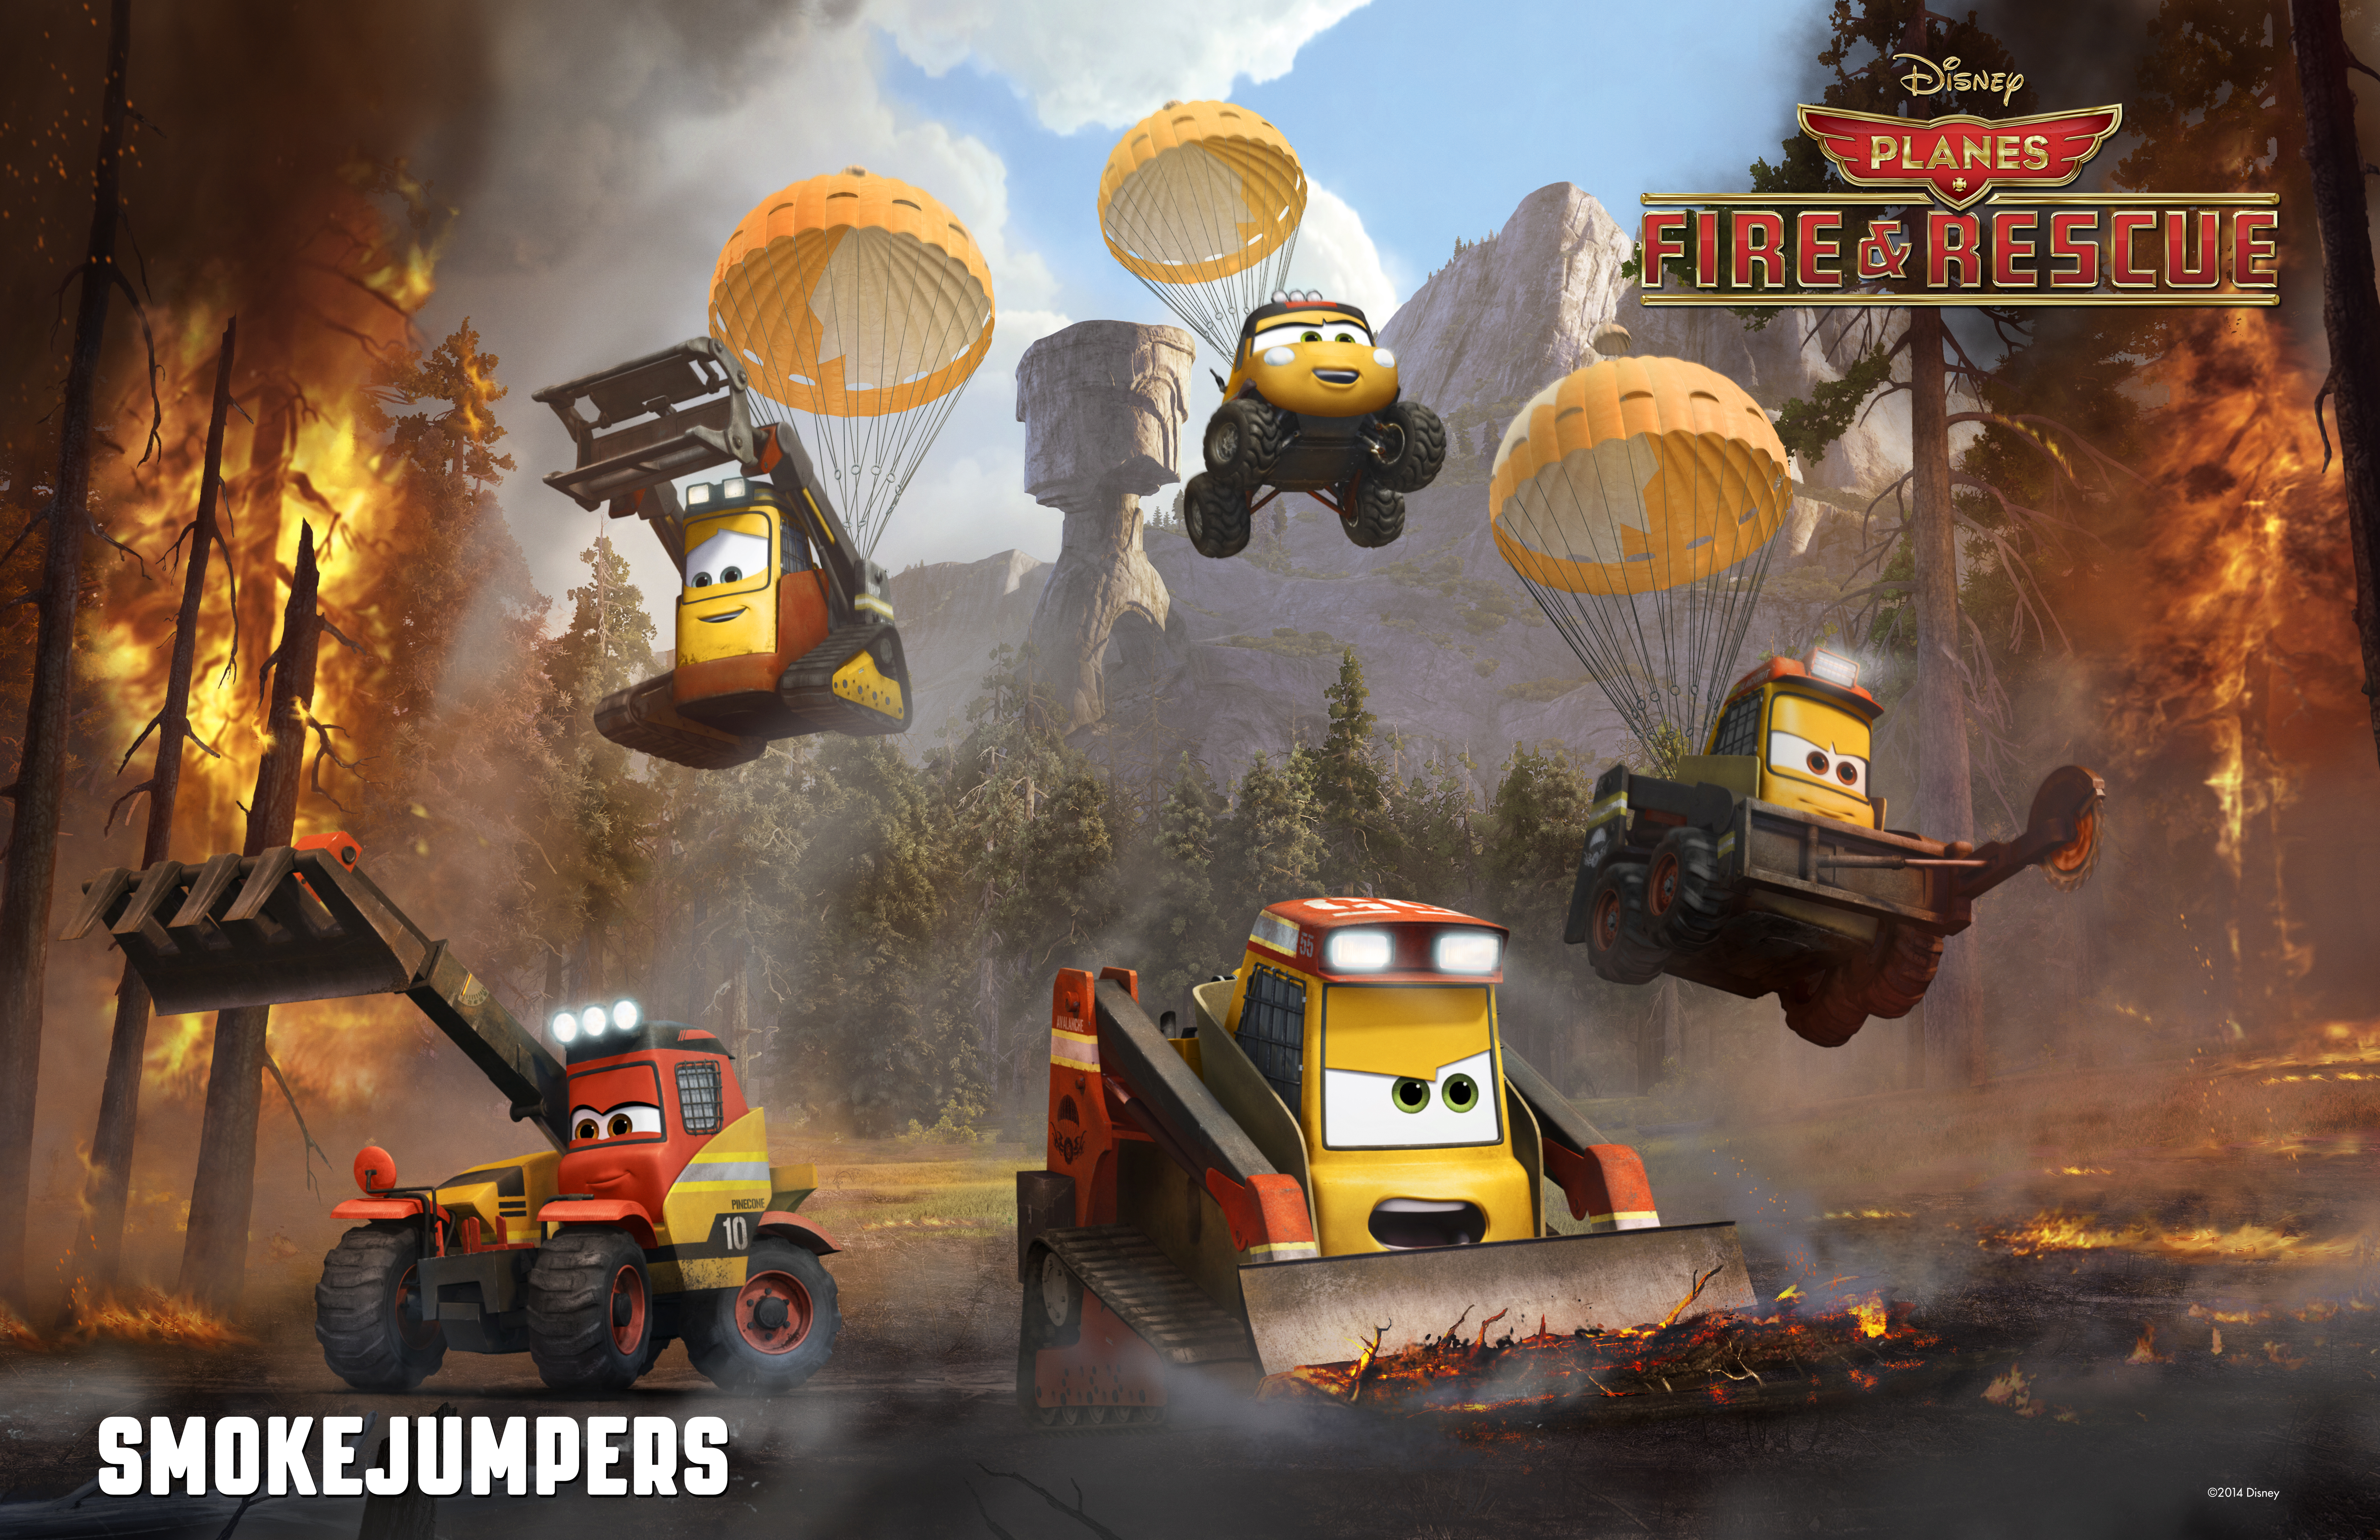 Amazing Planes: Fire & Rescue Pictures & Backgrounds